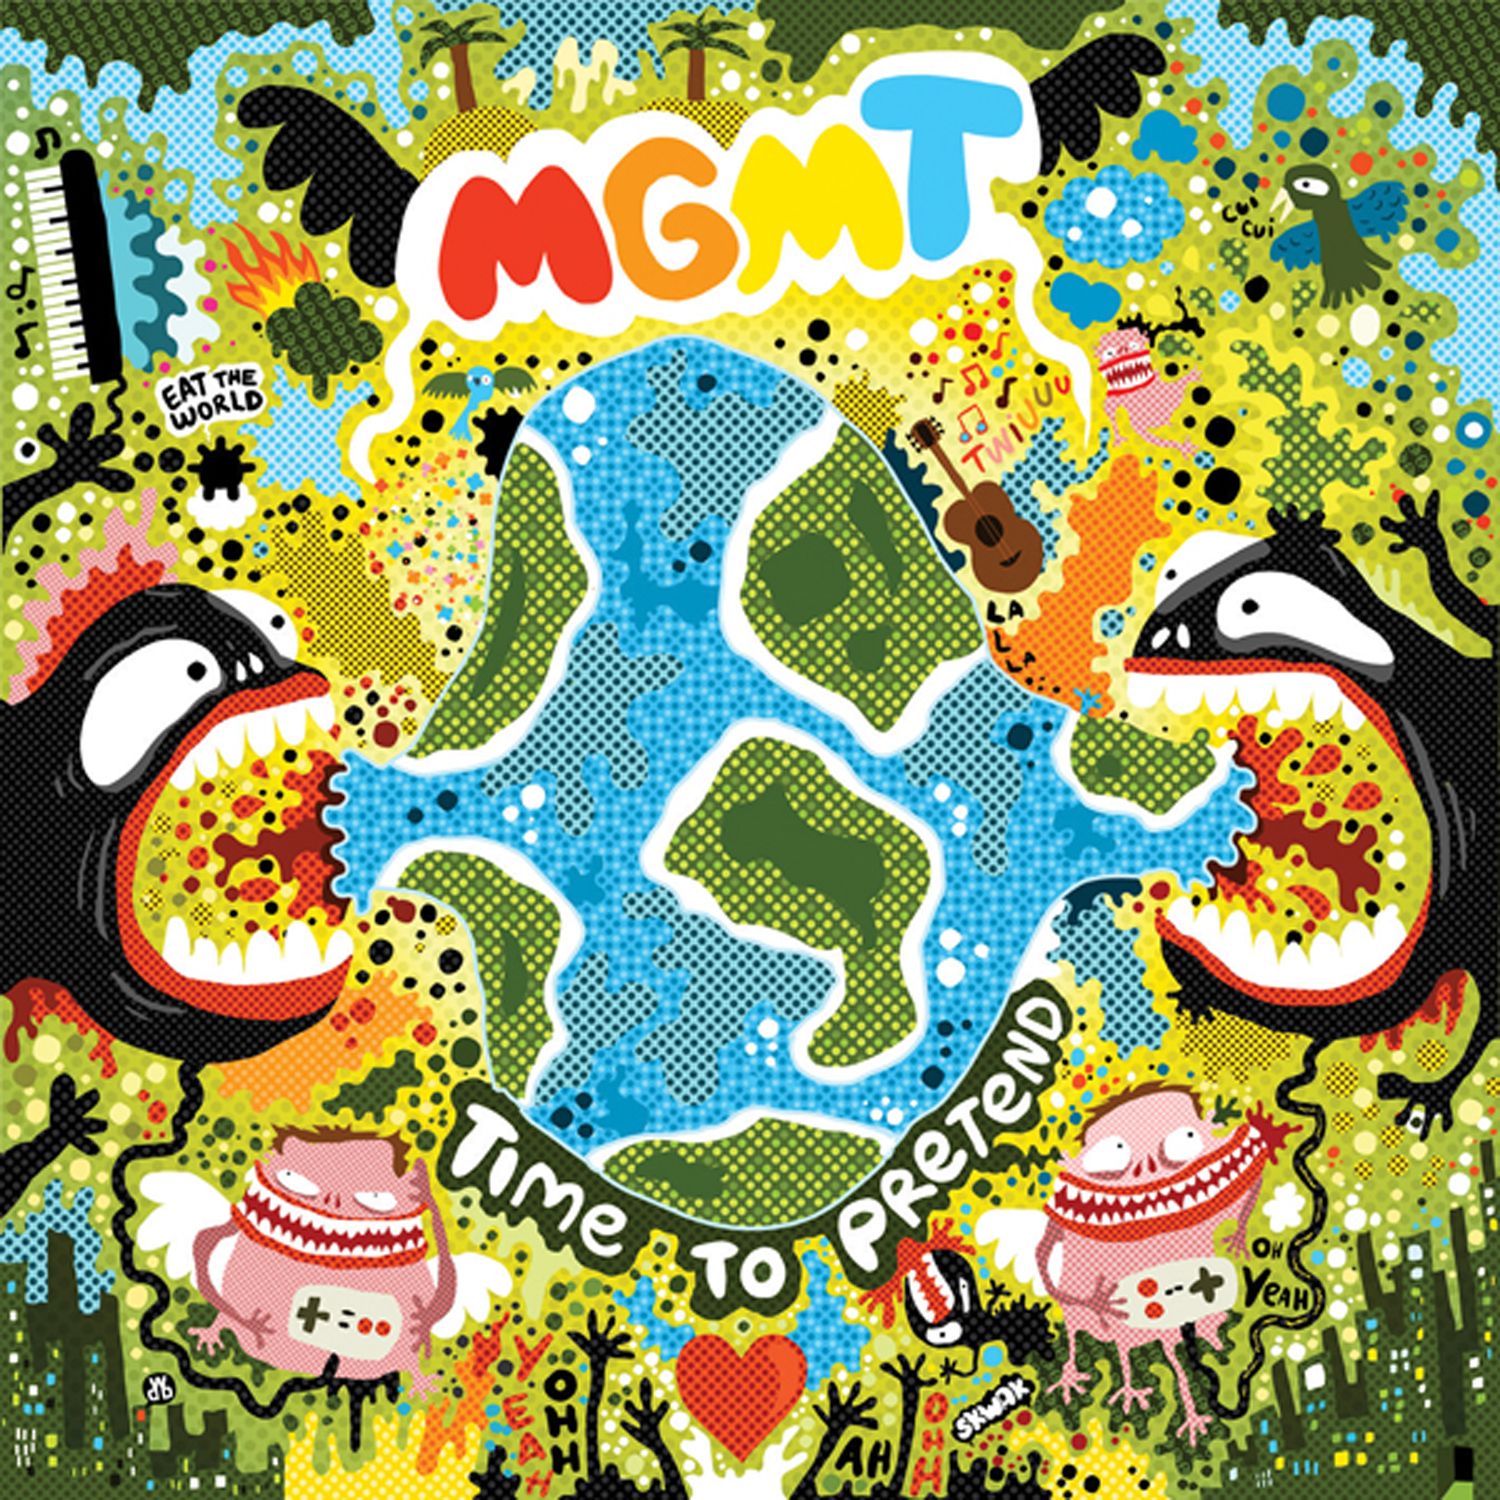 MGMT - Time to Pretend EP